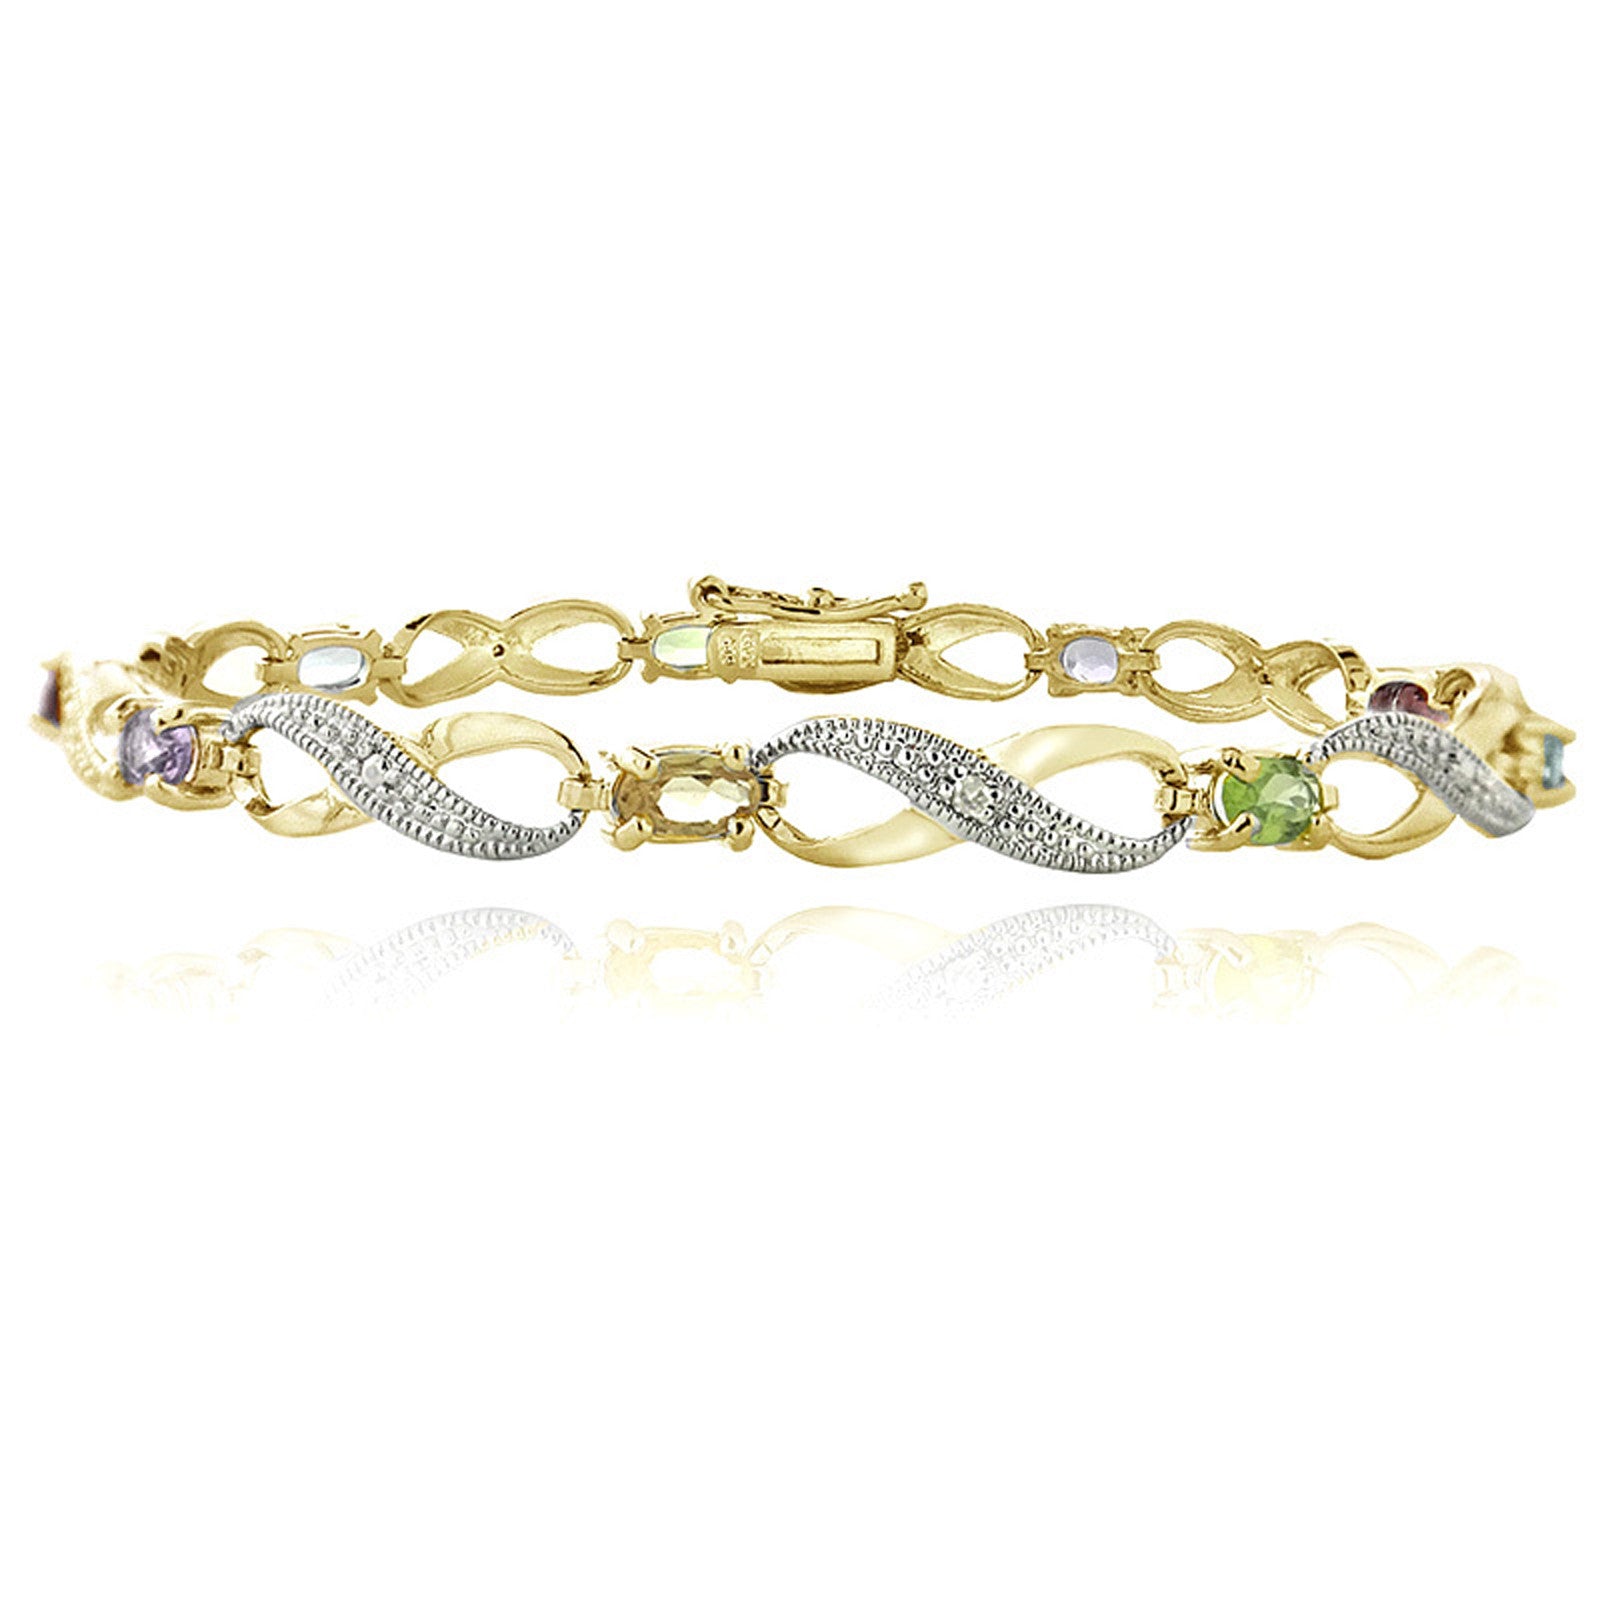 Infinity Bracelet With Diamond & Gem Accents in a Linked Style - Gold / Multi